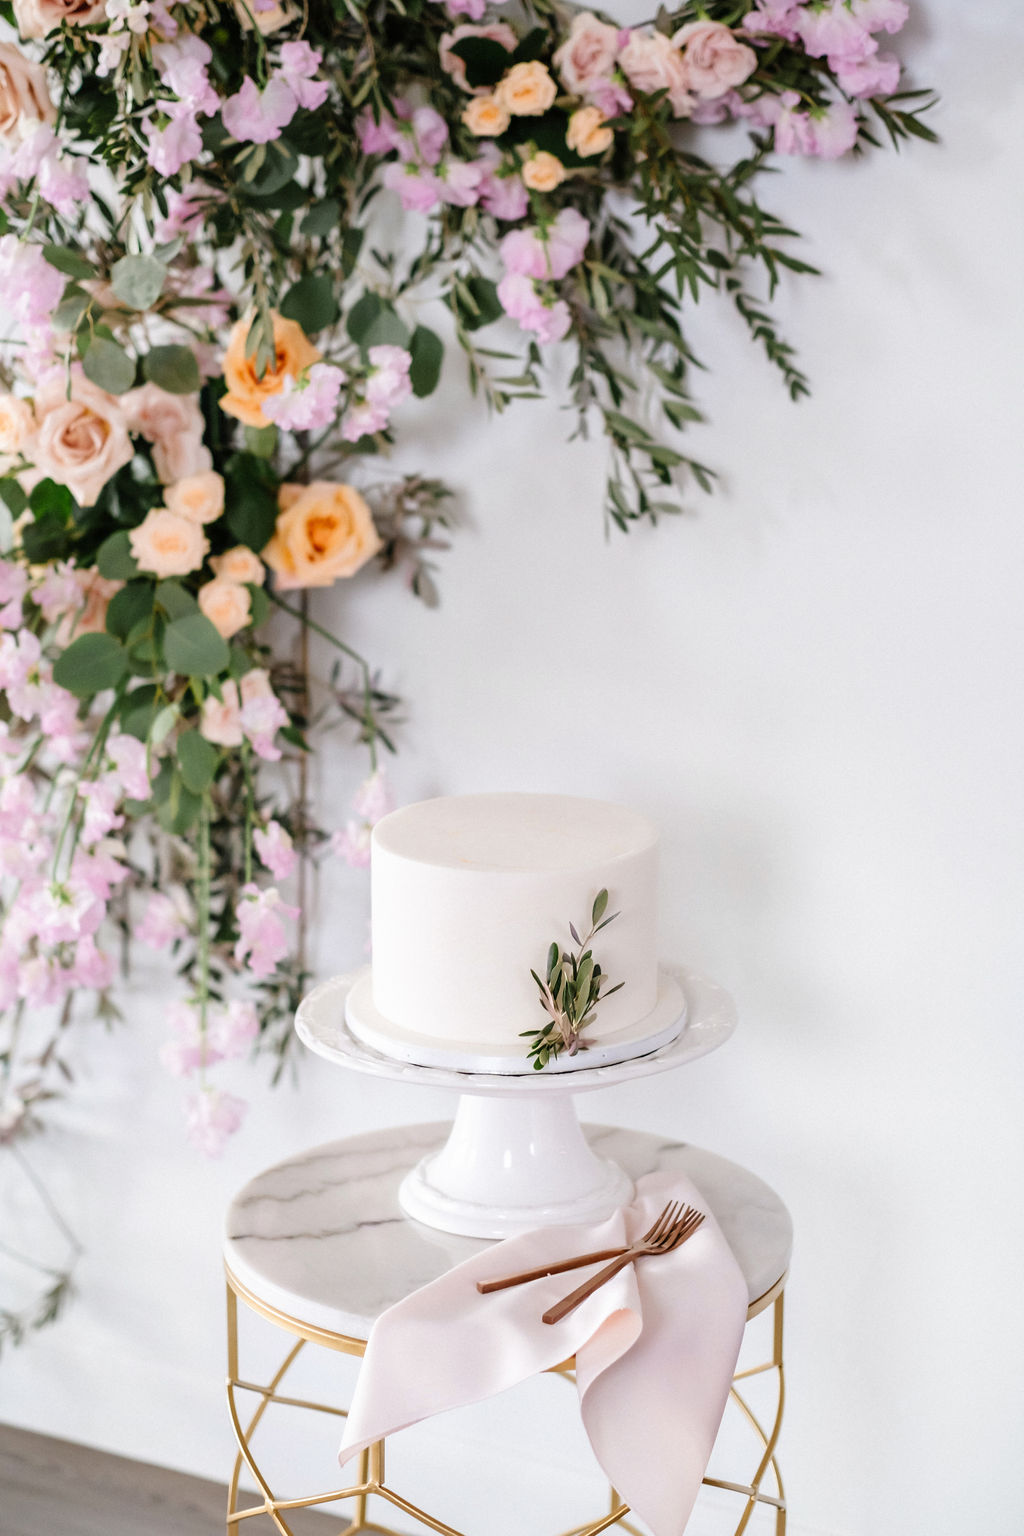 One tier simple white wedding cake in front of a floral installation featuring orange and pink roses